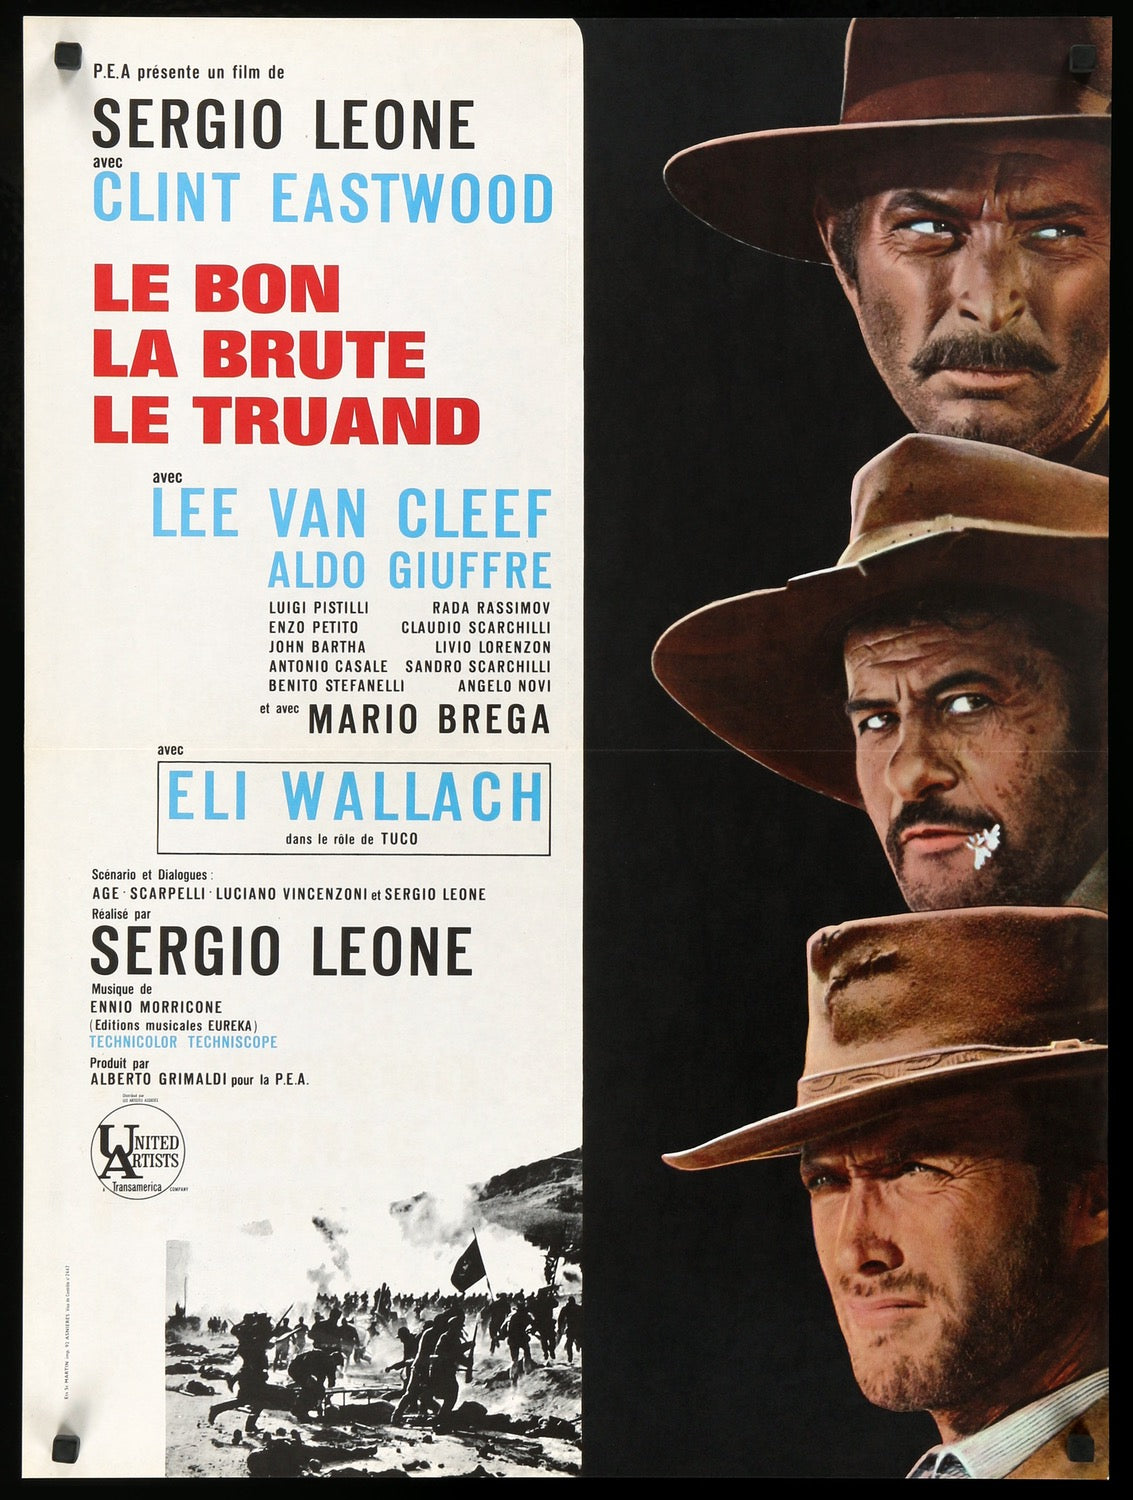 Good, the Bad and the Ugly (1966) original movie poster for sale at Original Film Art